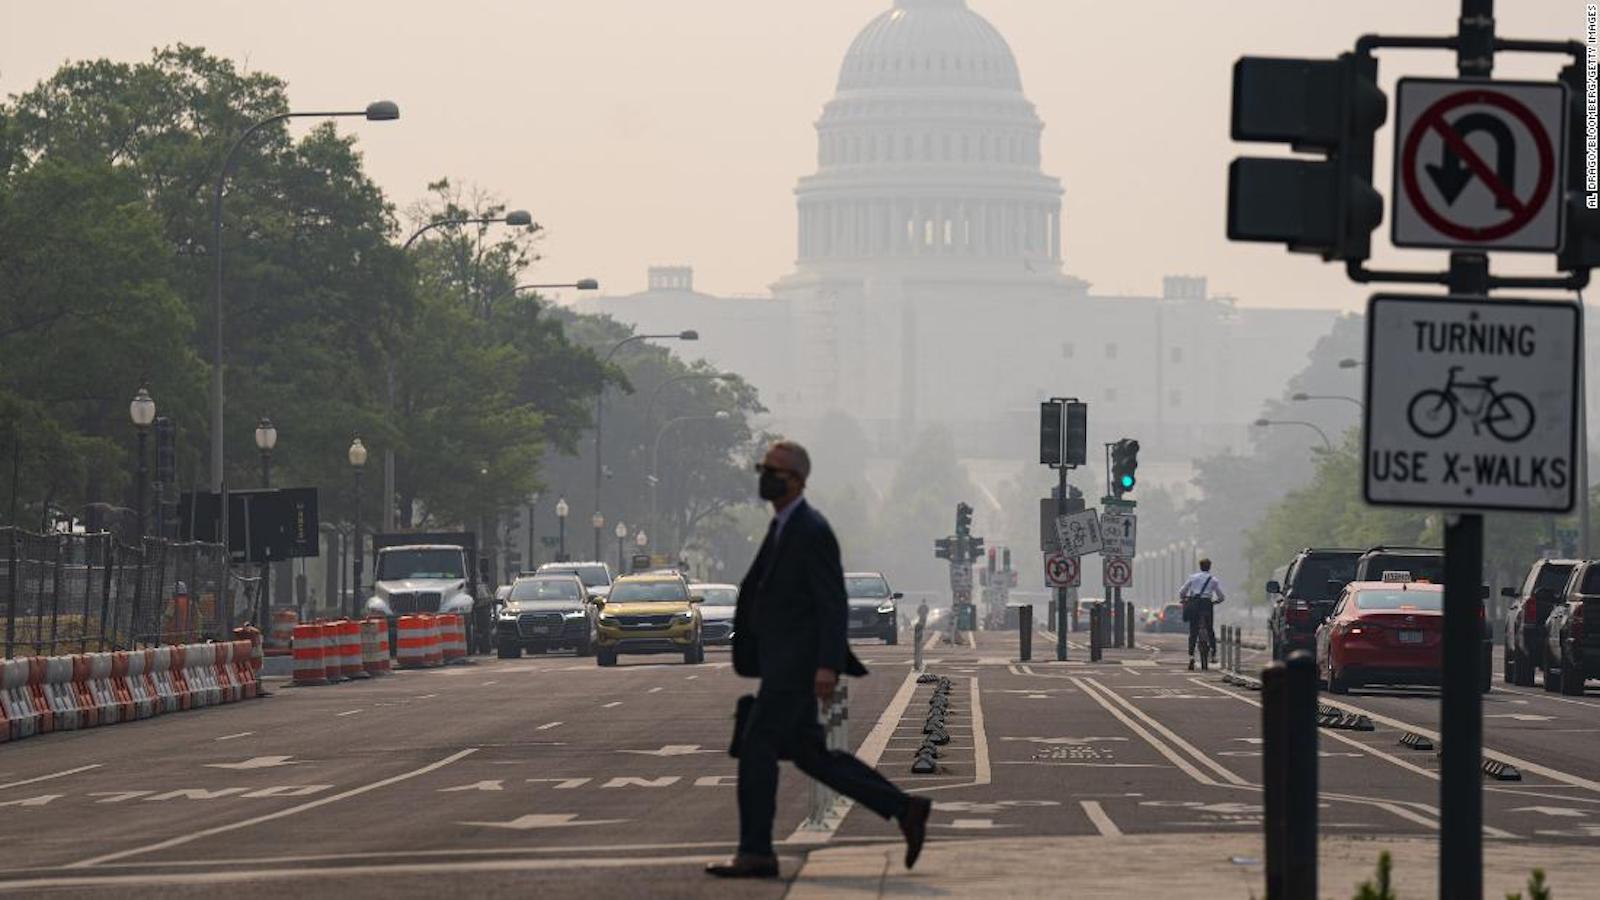 Air quality is improving in the United States and Canada, but the smoke and turbulent skies will take time to clear